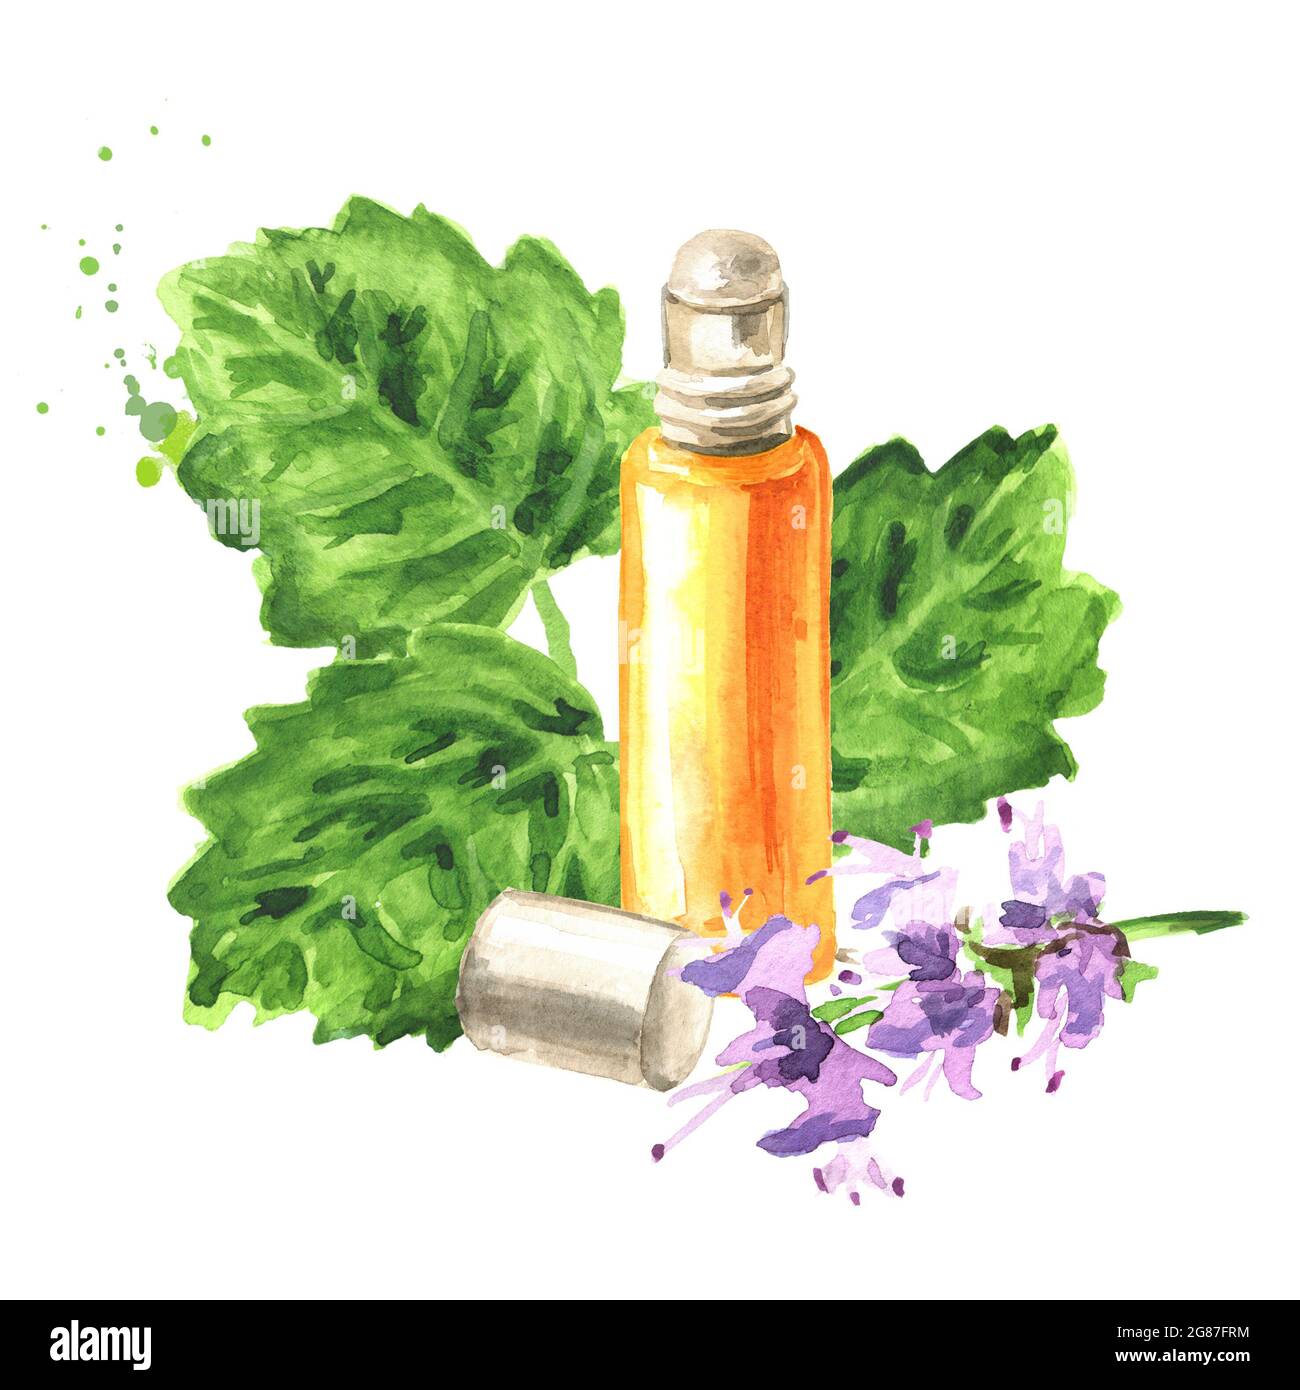 Patchouli or Pogostemon cablini essential oil bottle. Hand drawn watercolor illustration, isolated on white background Stock Photo